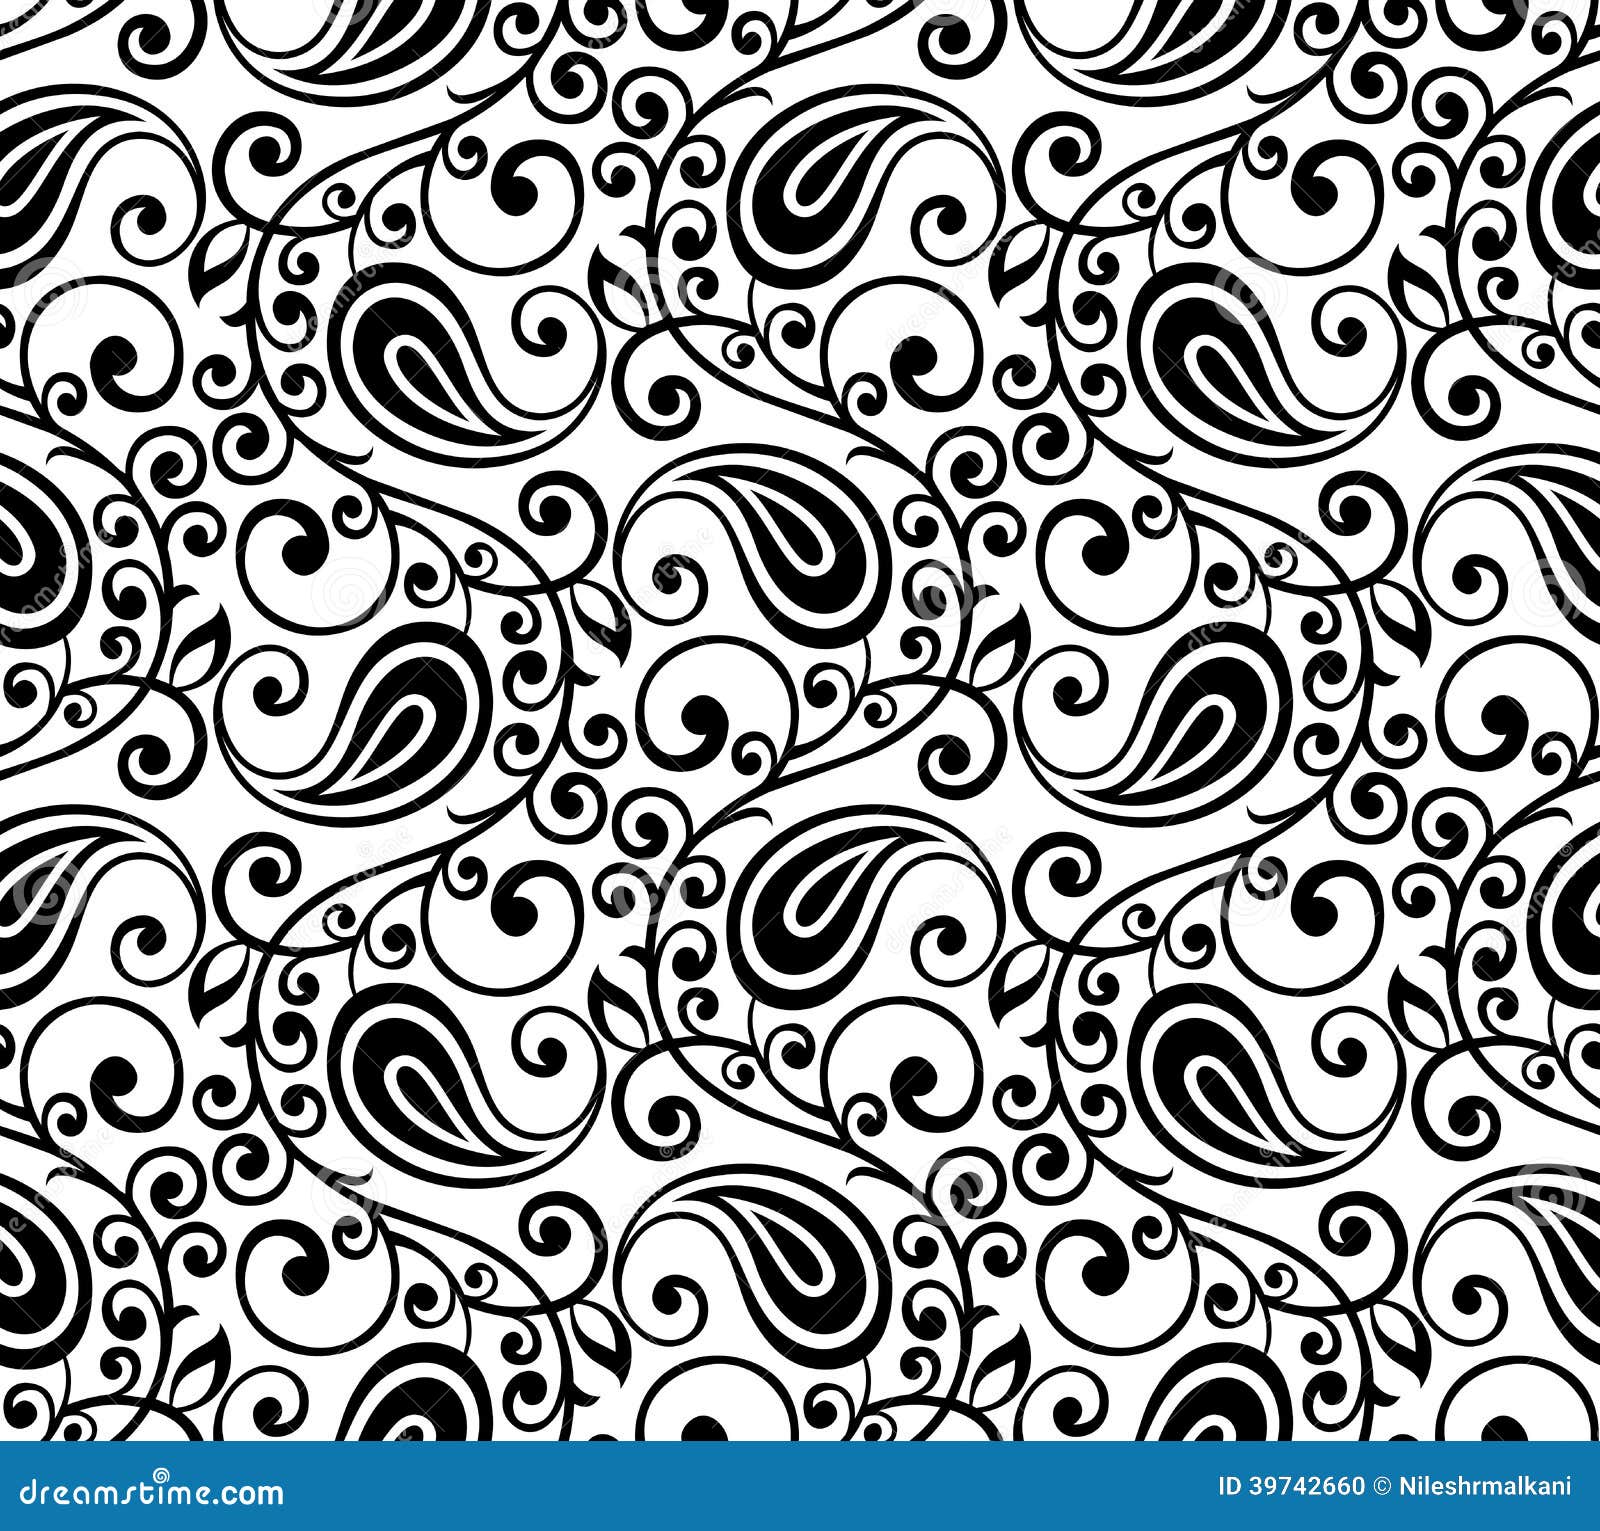 Download Seamless Paisley Vector Background Stock Vector - Image ...